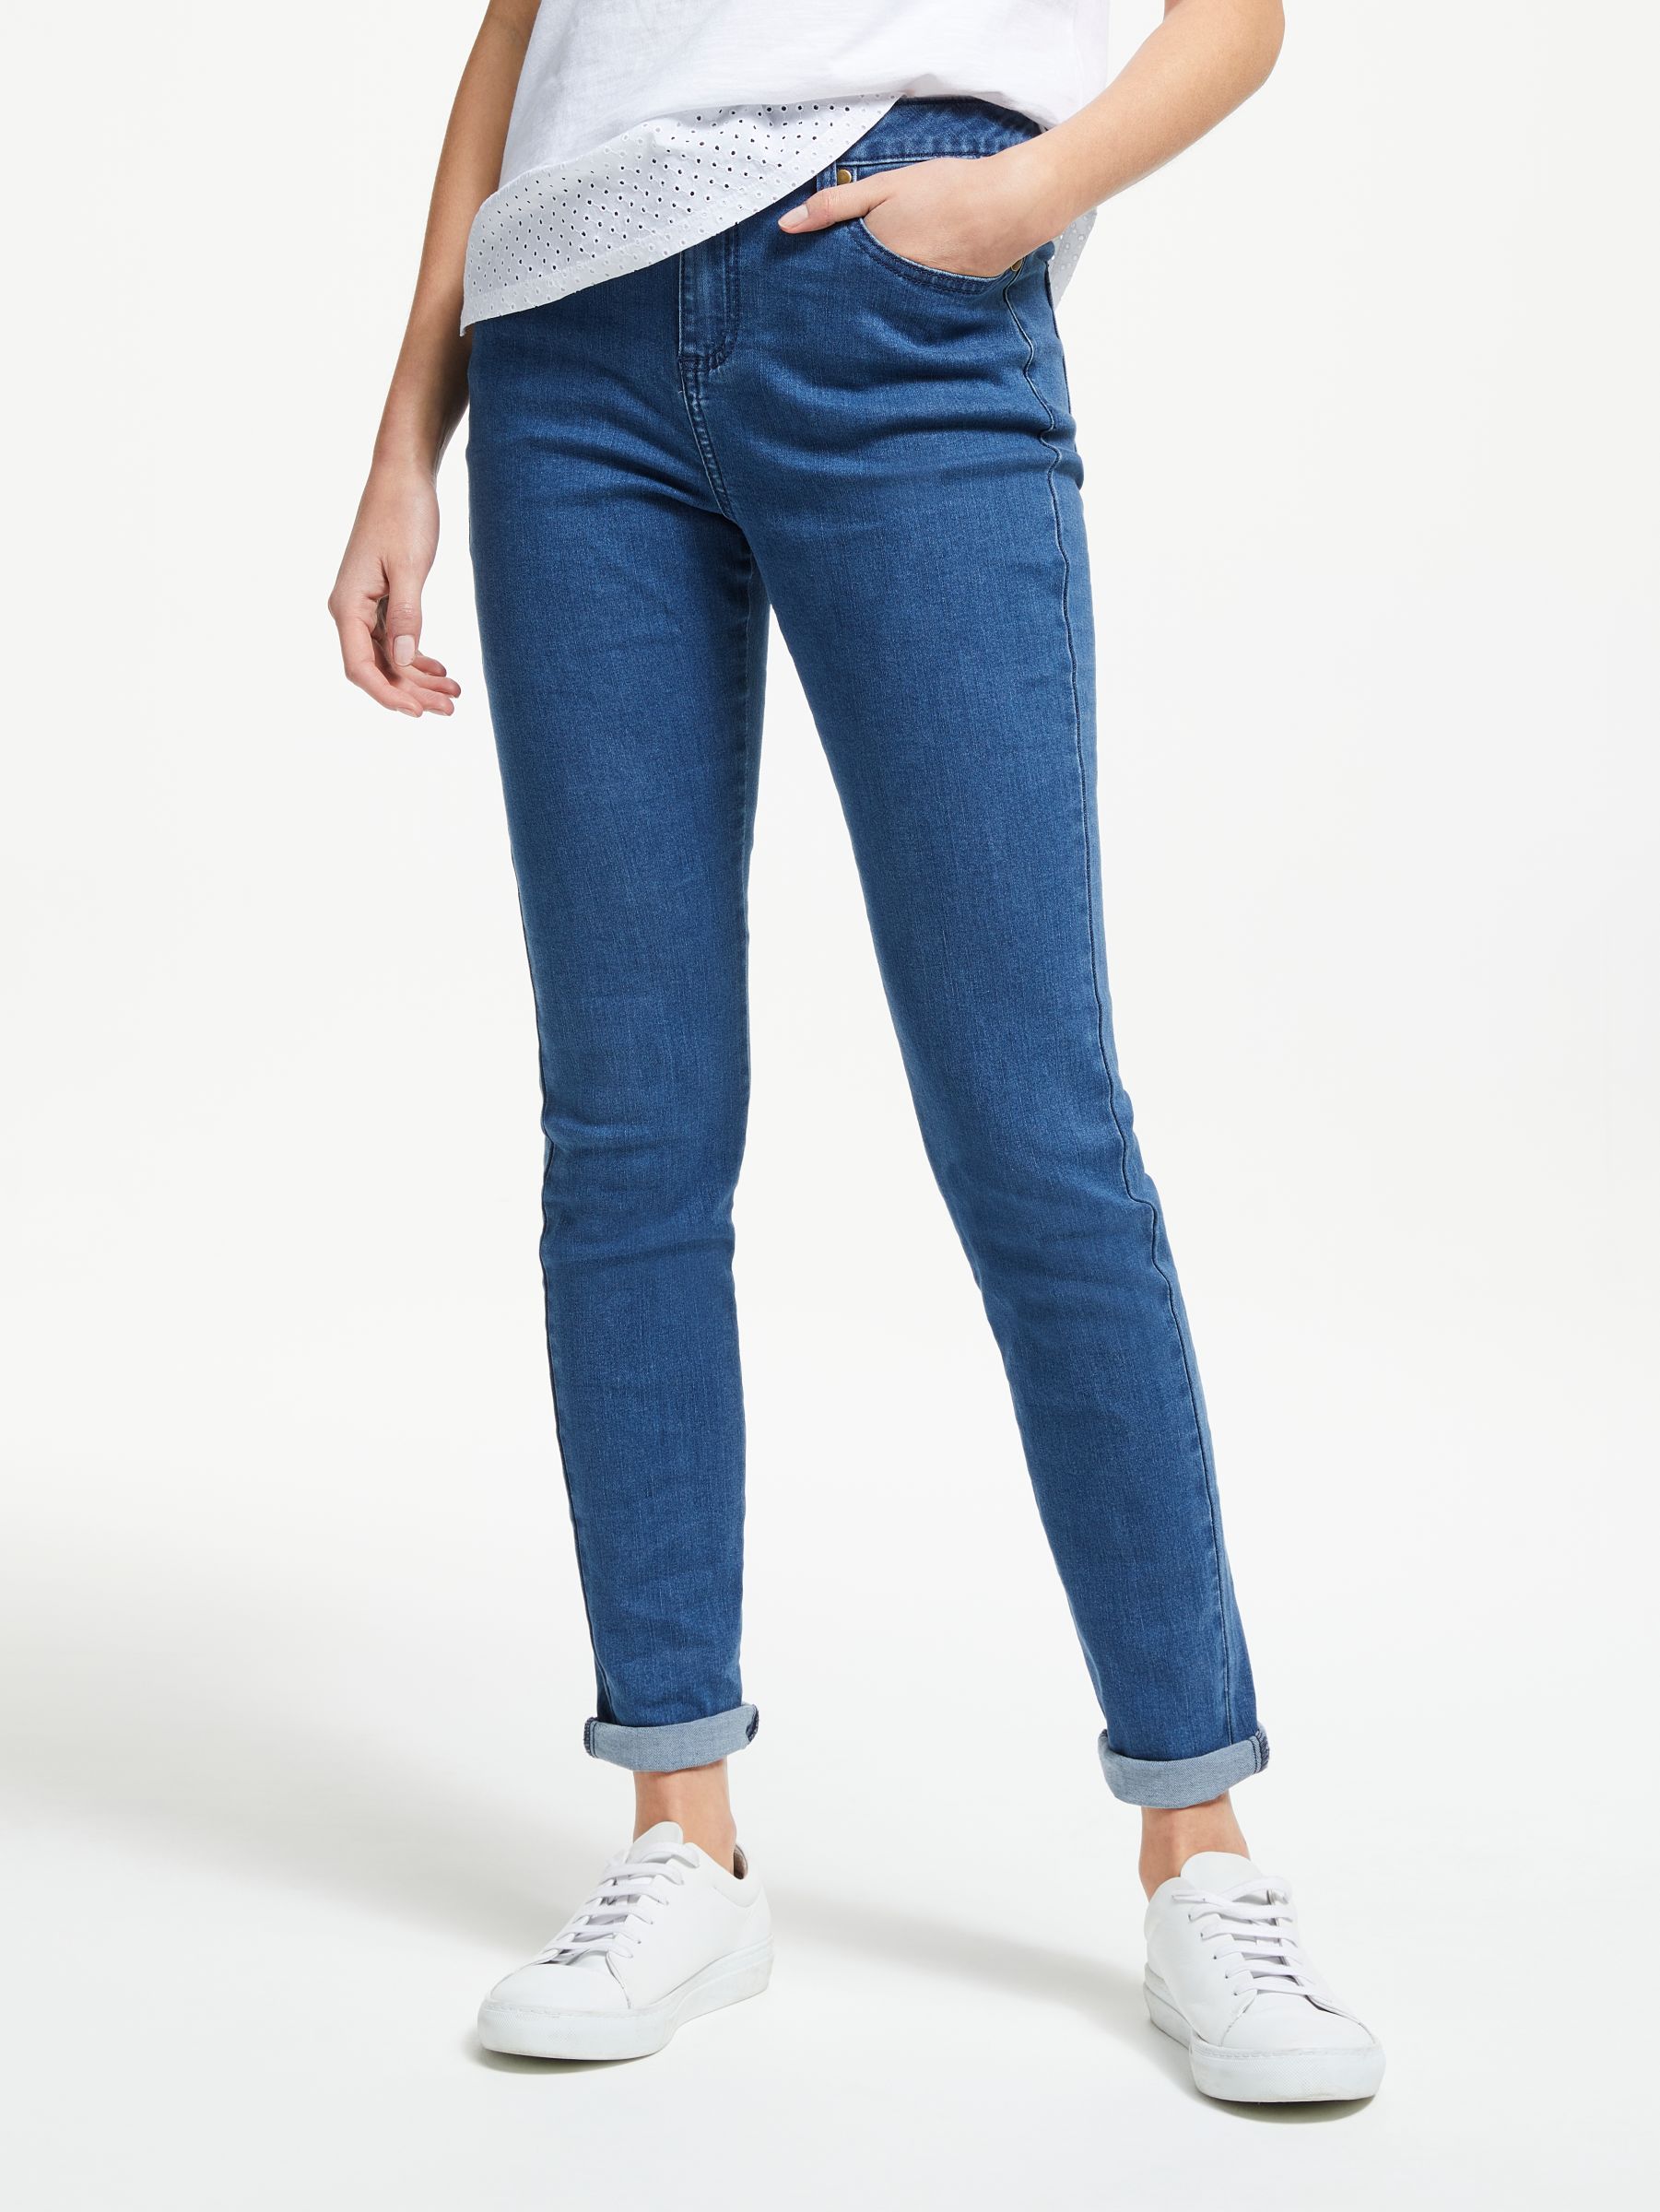 Collection WEEKEND by John Lewis Liza Slim Leg Jeans, Mid Blue